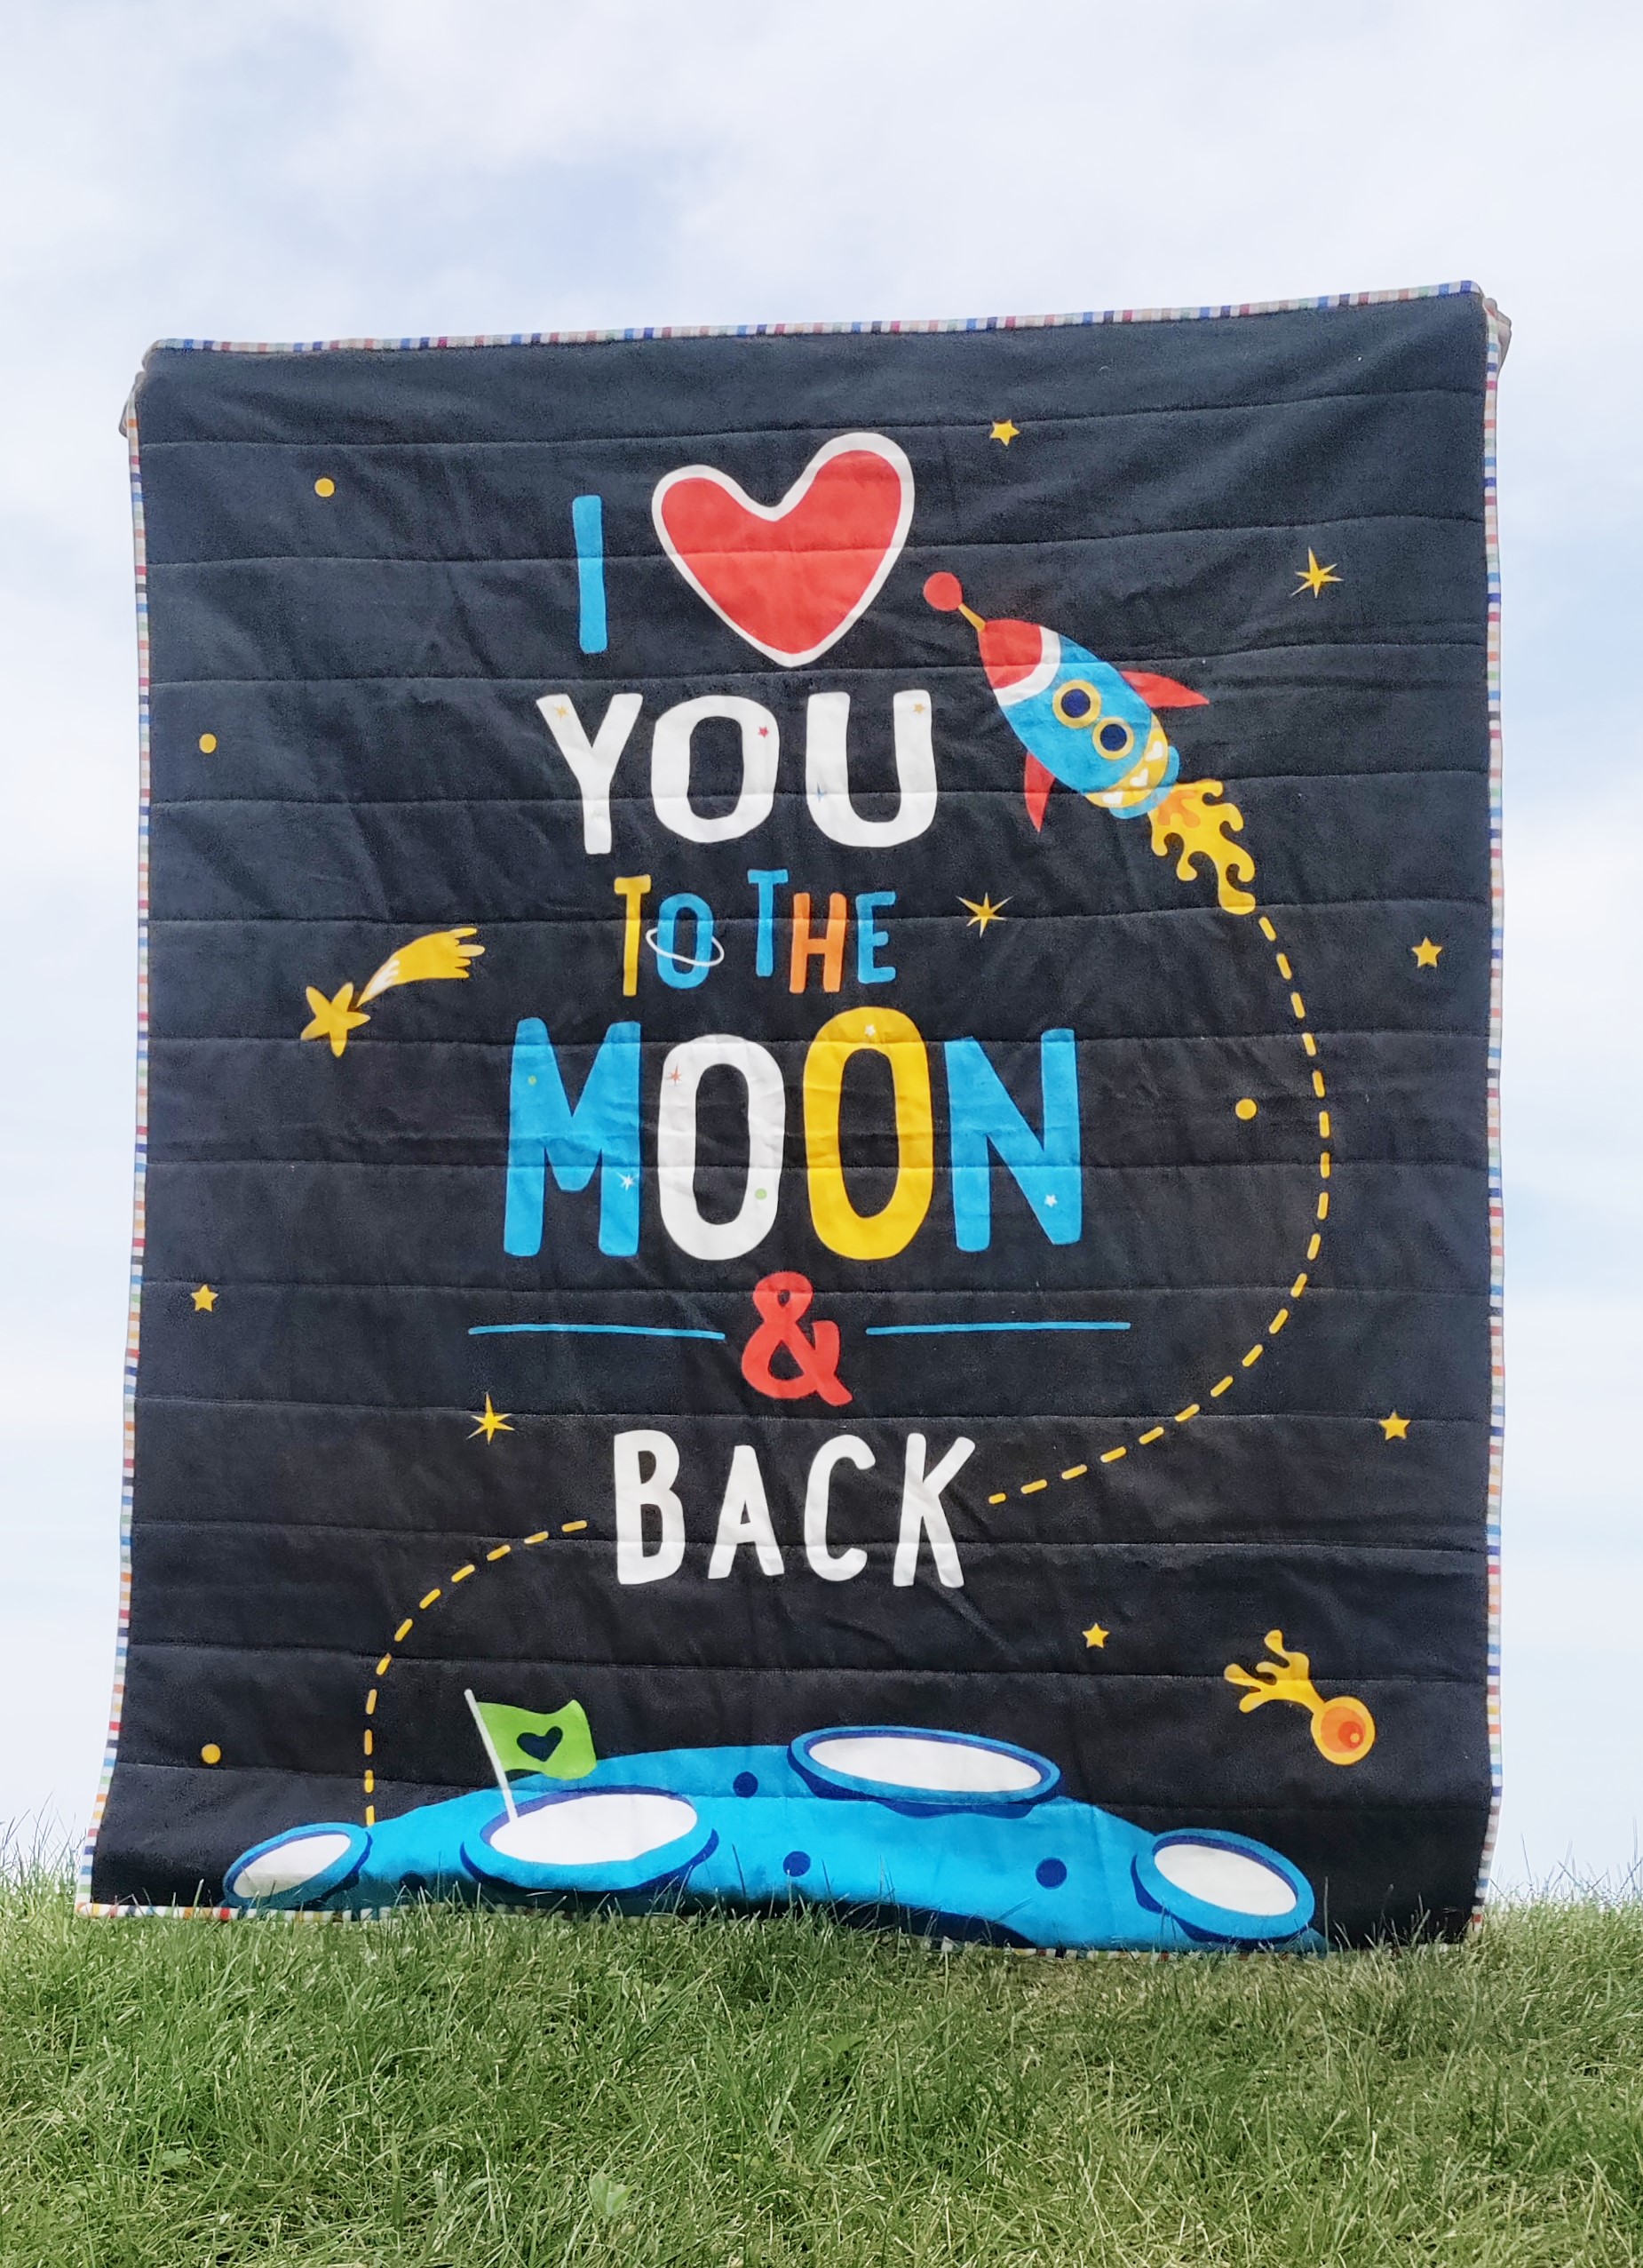 A quilt with the words "I love you to the moon and back" being held up by a young boy against a light colored sky